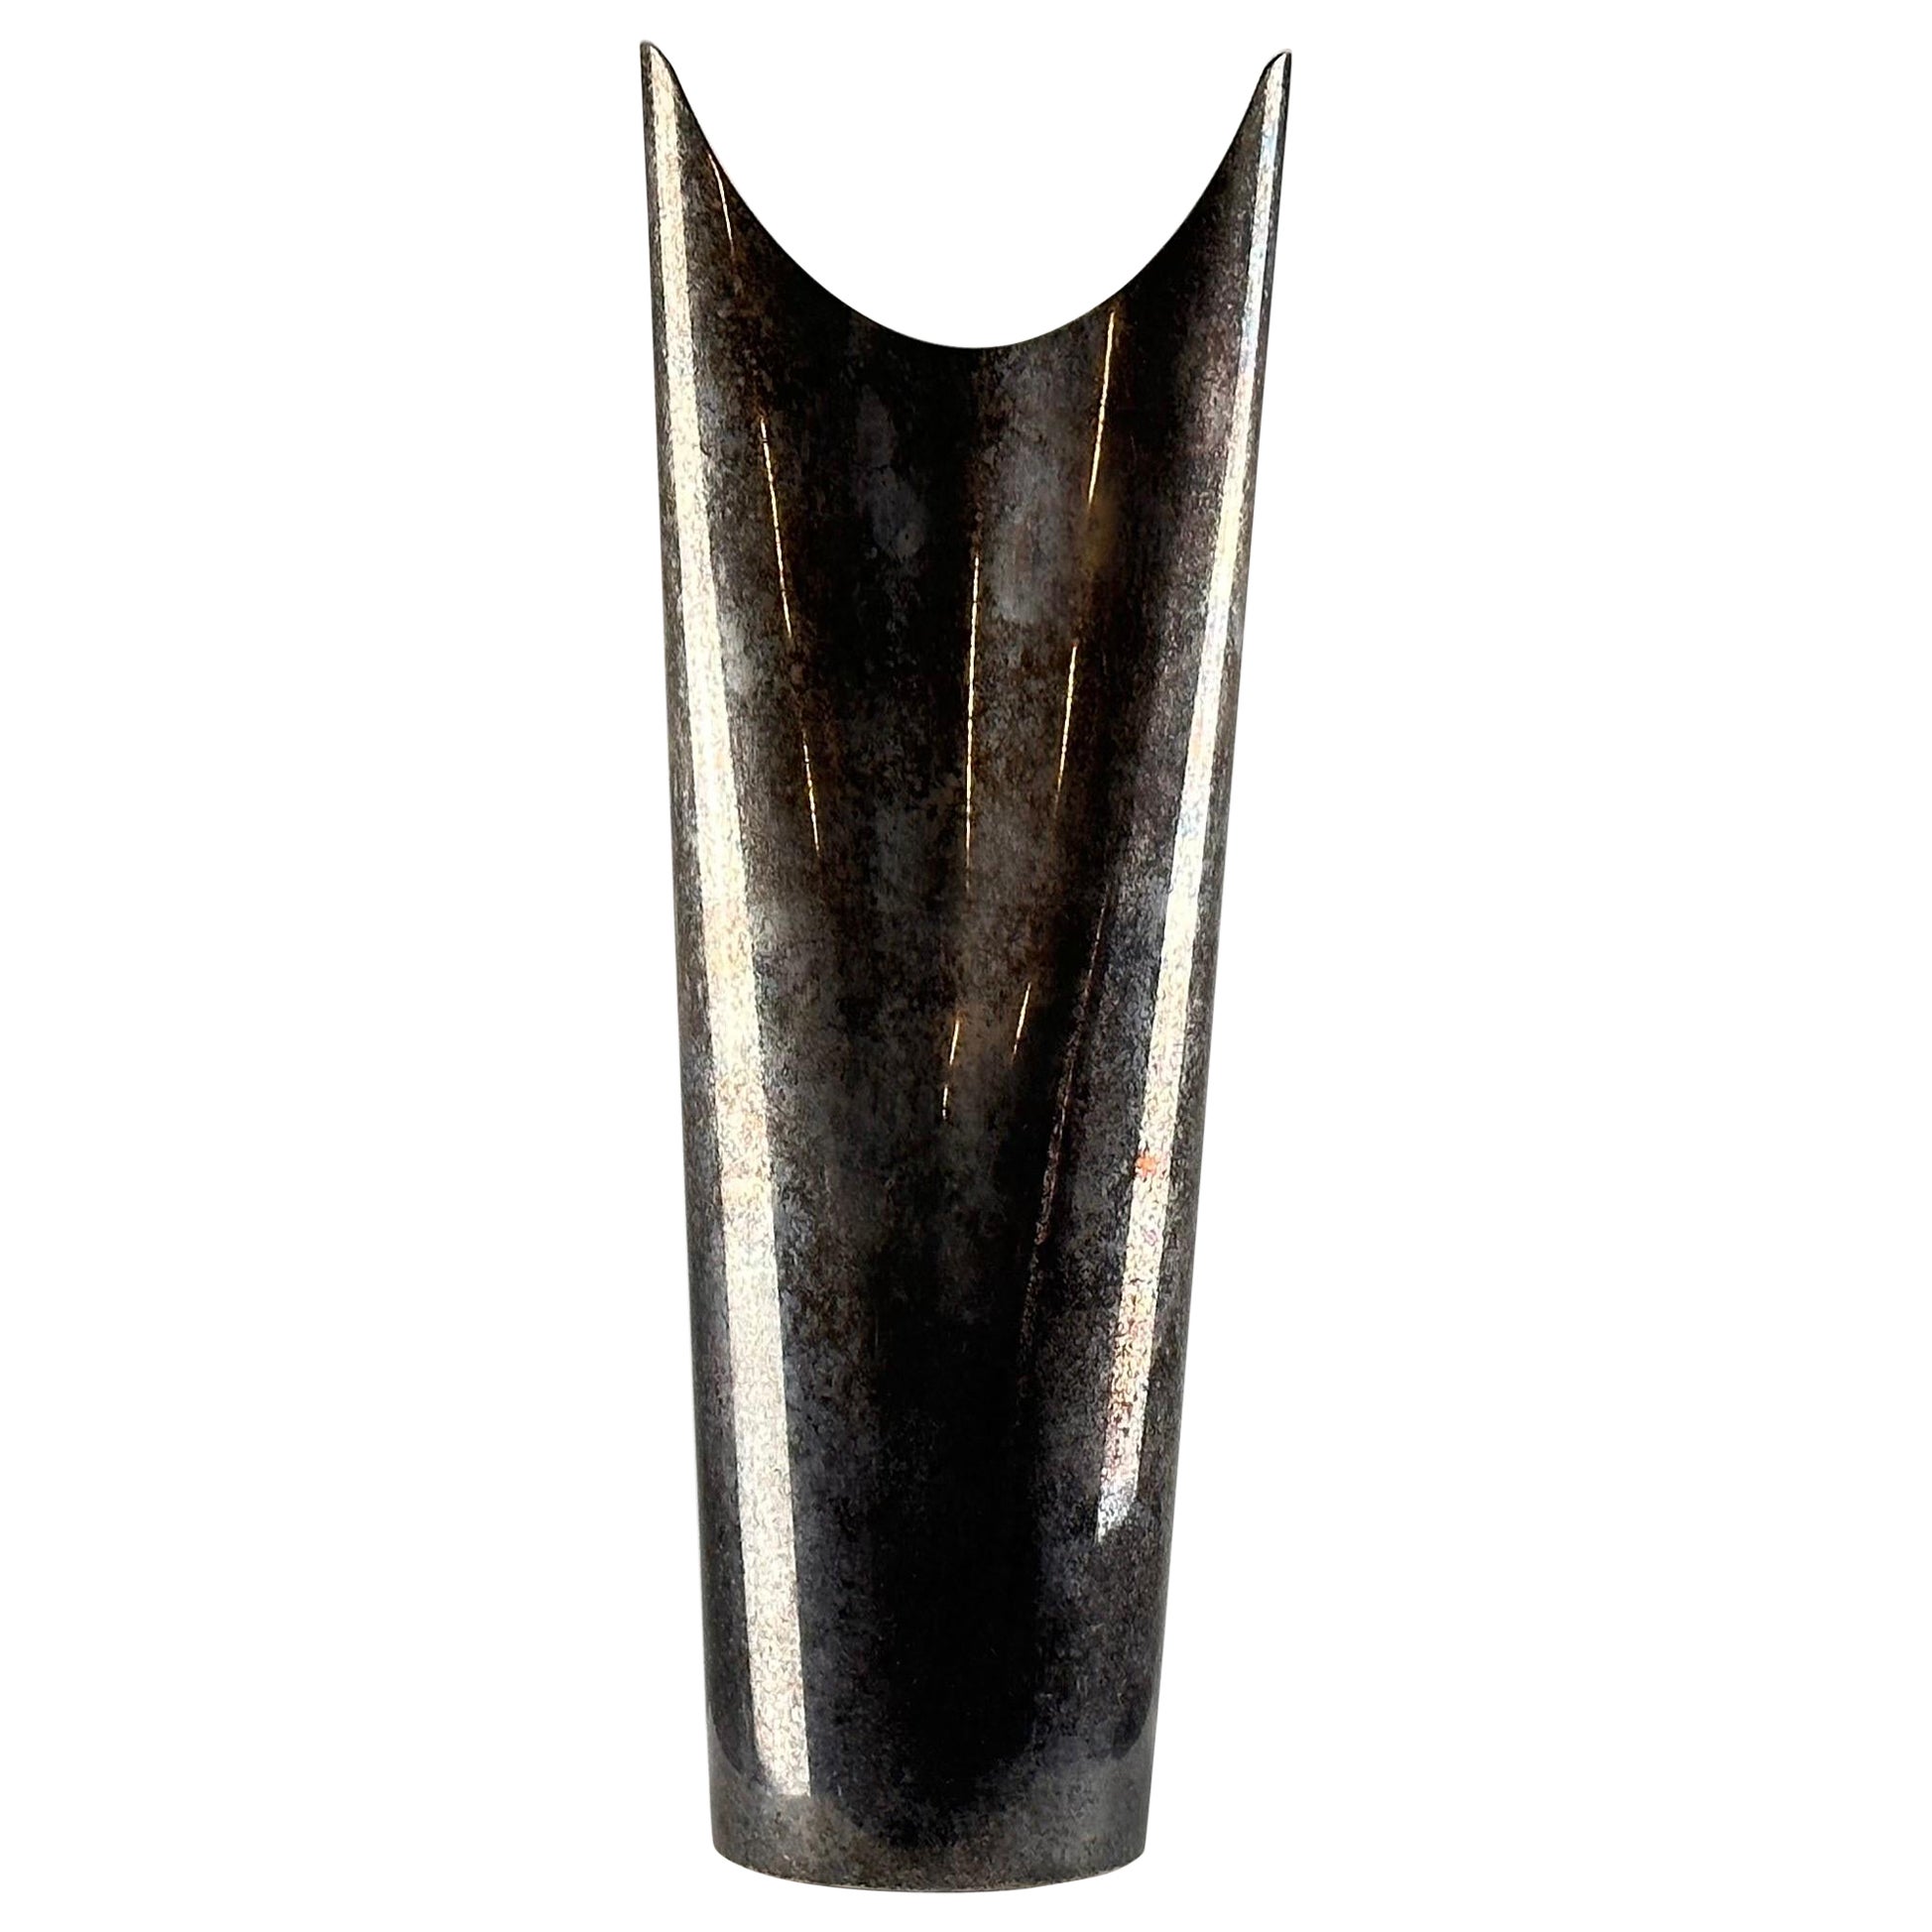 Exquisite Limited Edition Large Silver Plate Vase by Guido Niest, 1970s For Sale